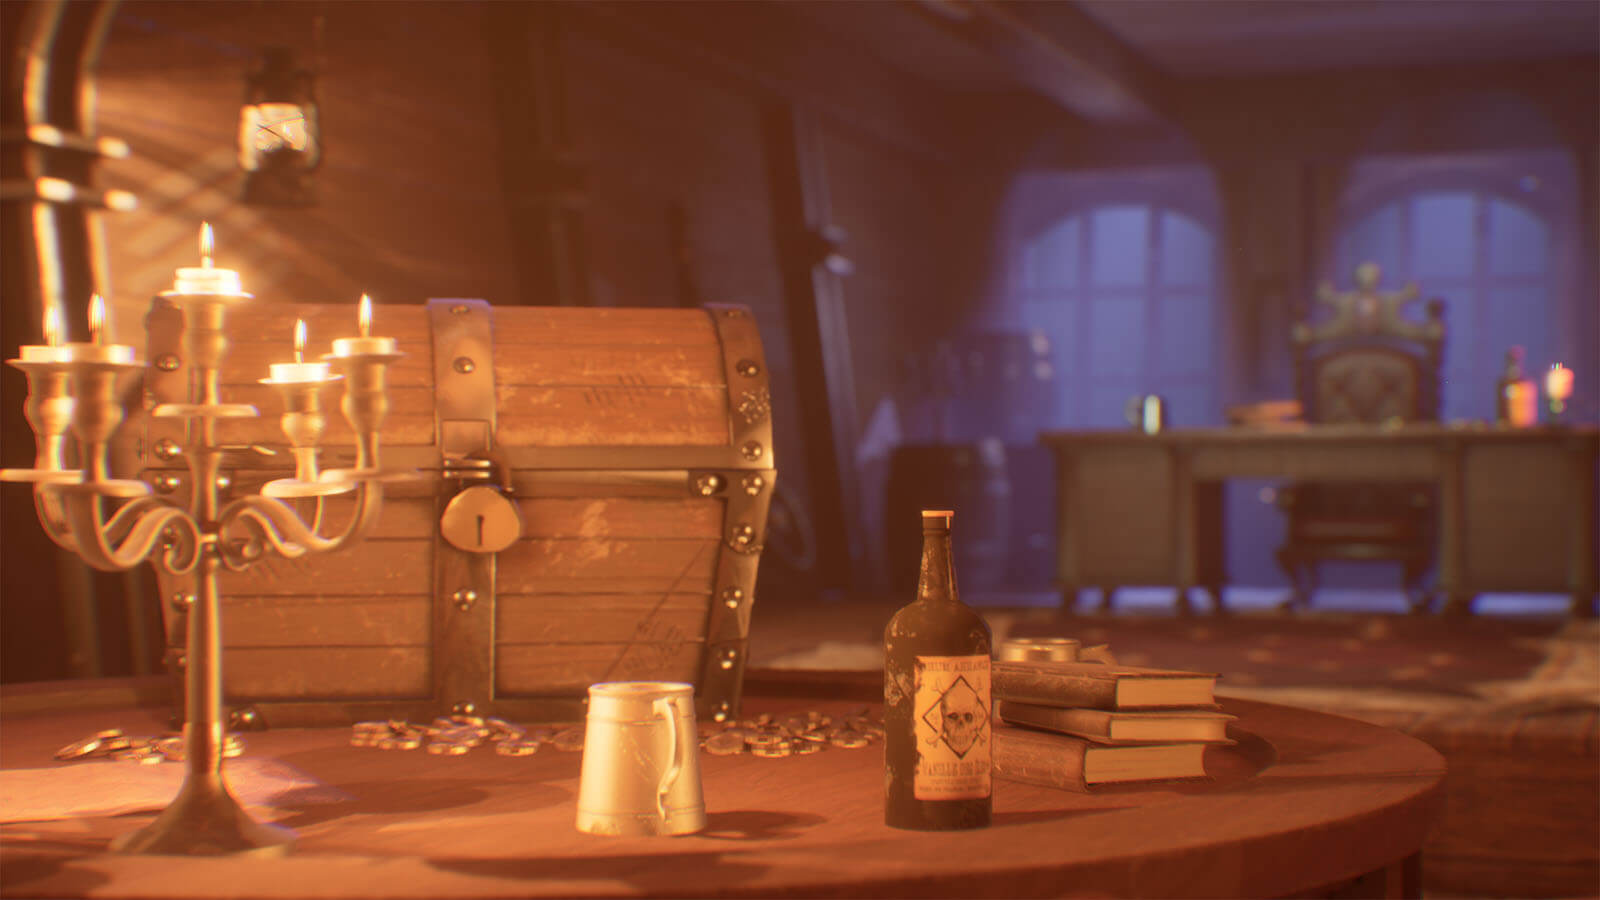 Brightly lit 3D scene of a pirate's inner chambers depicting a treasure chest on a table.